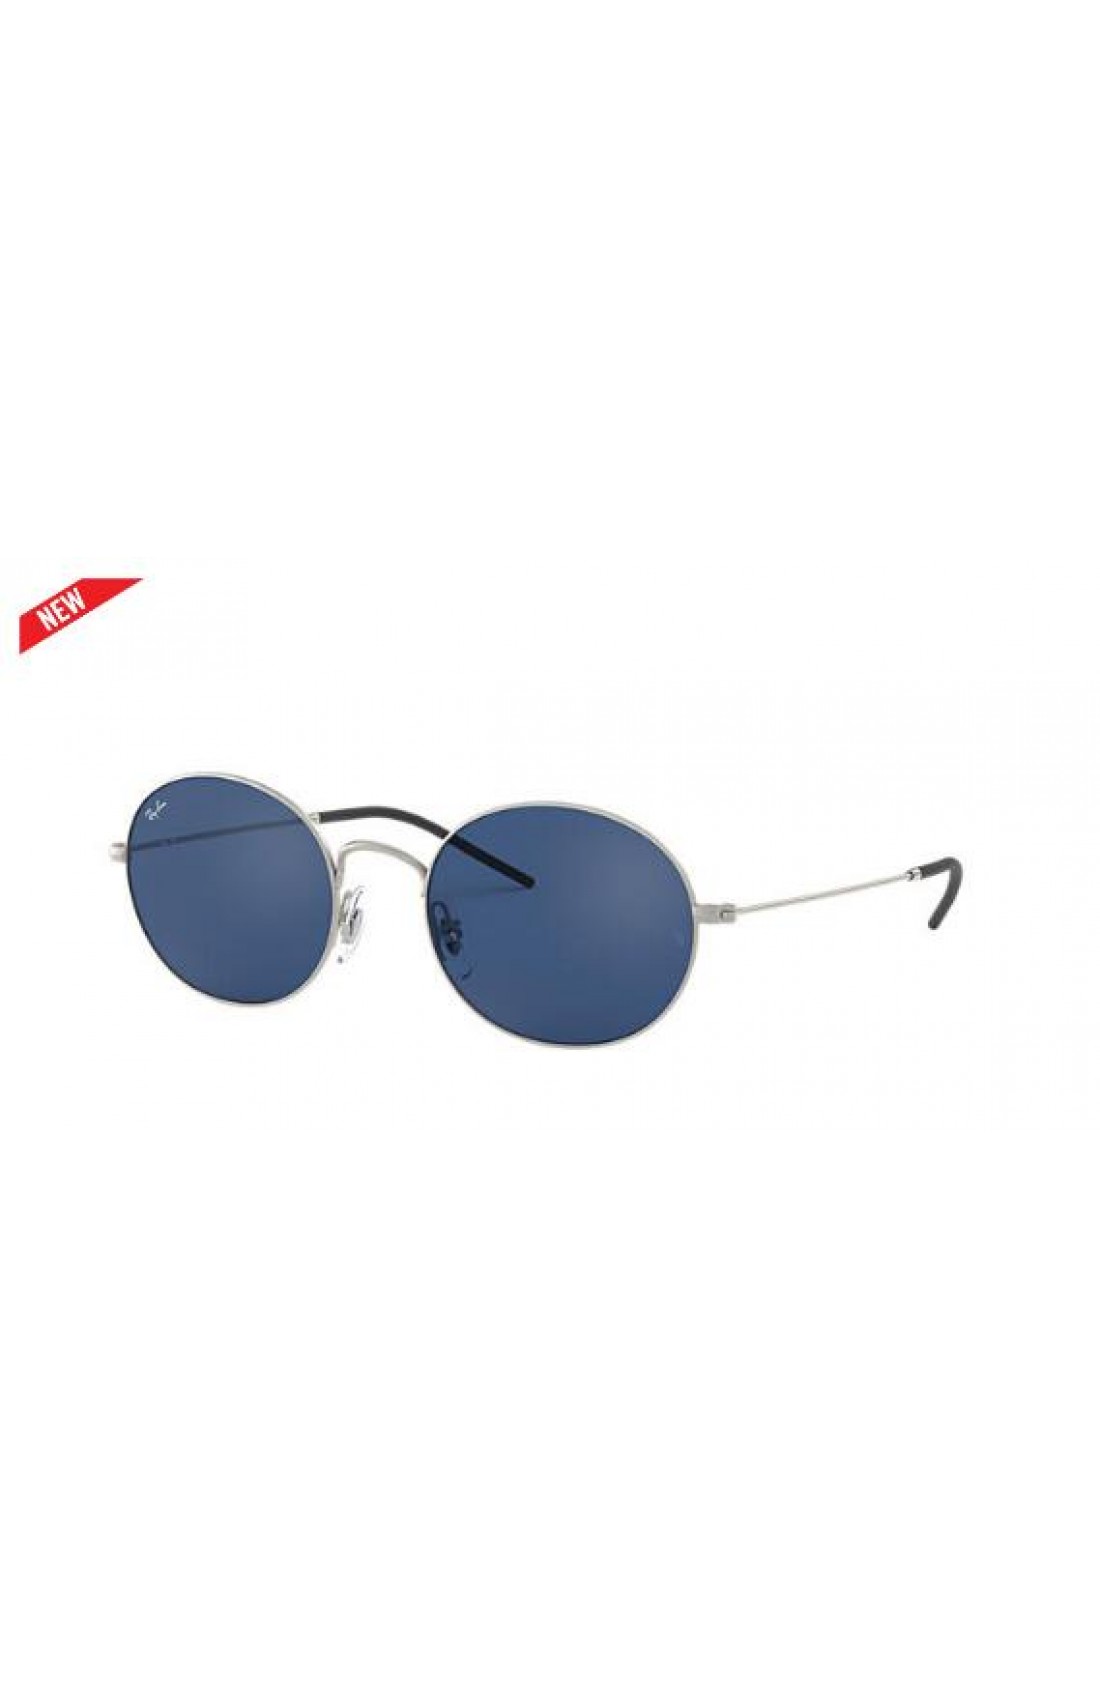 ray ban silver frame glasses